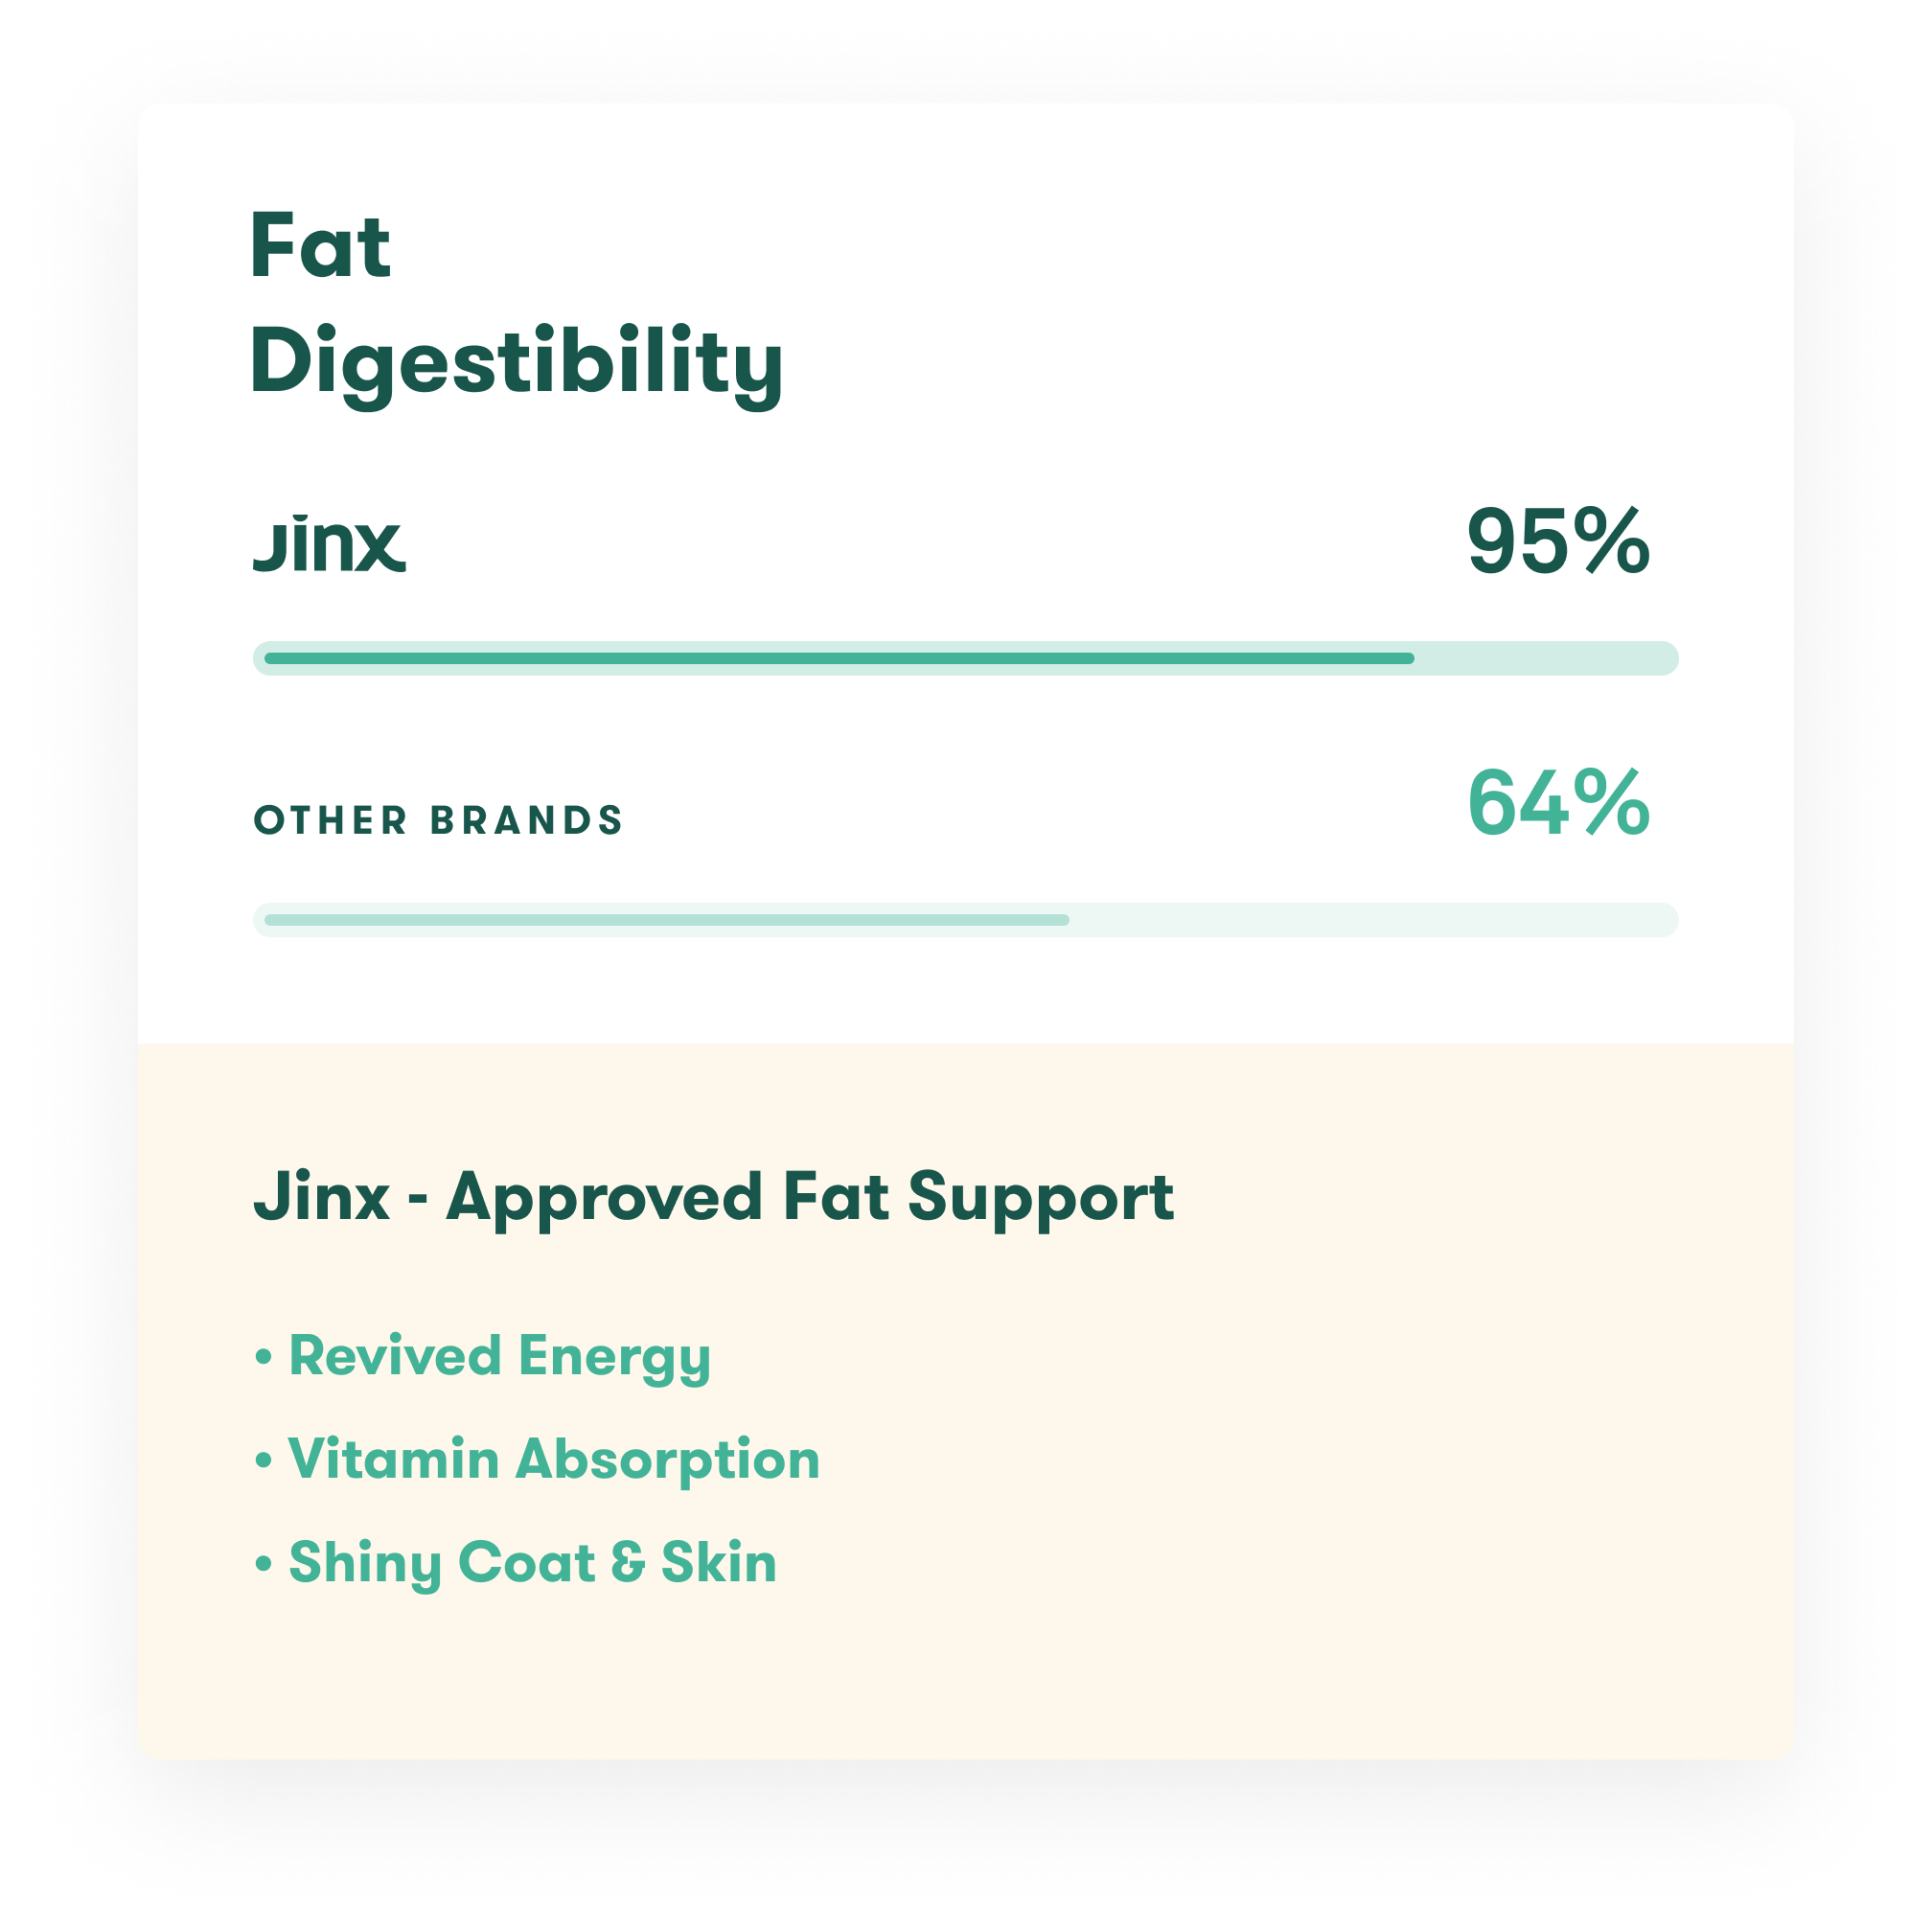 Fat digestibility graph with Jinx at 95% and other brands at 64% 